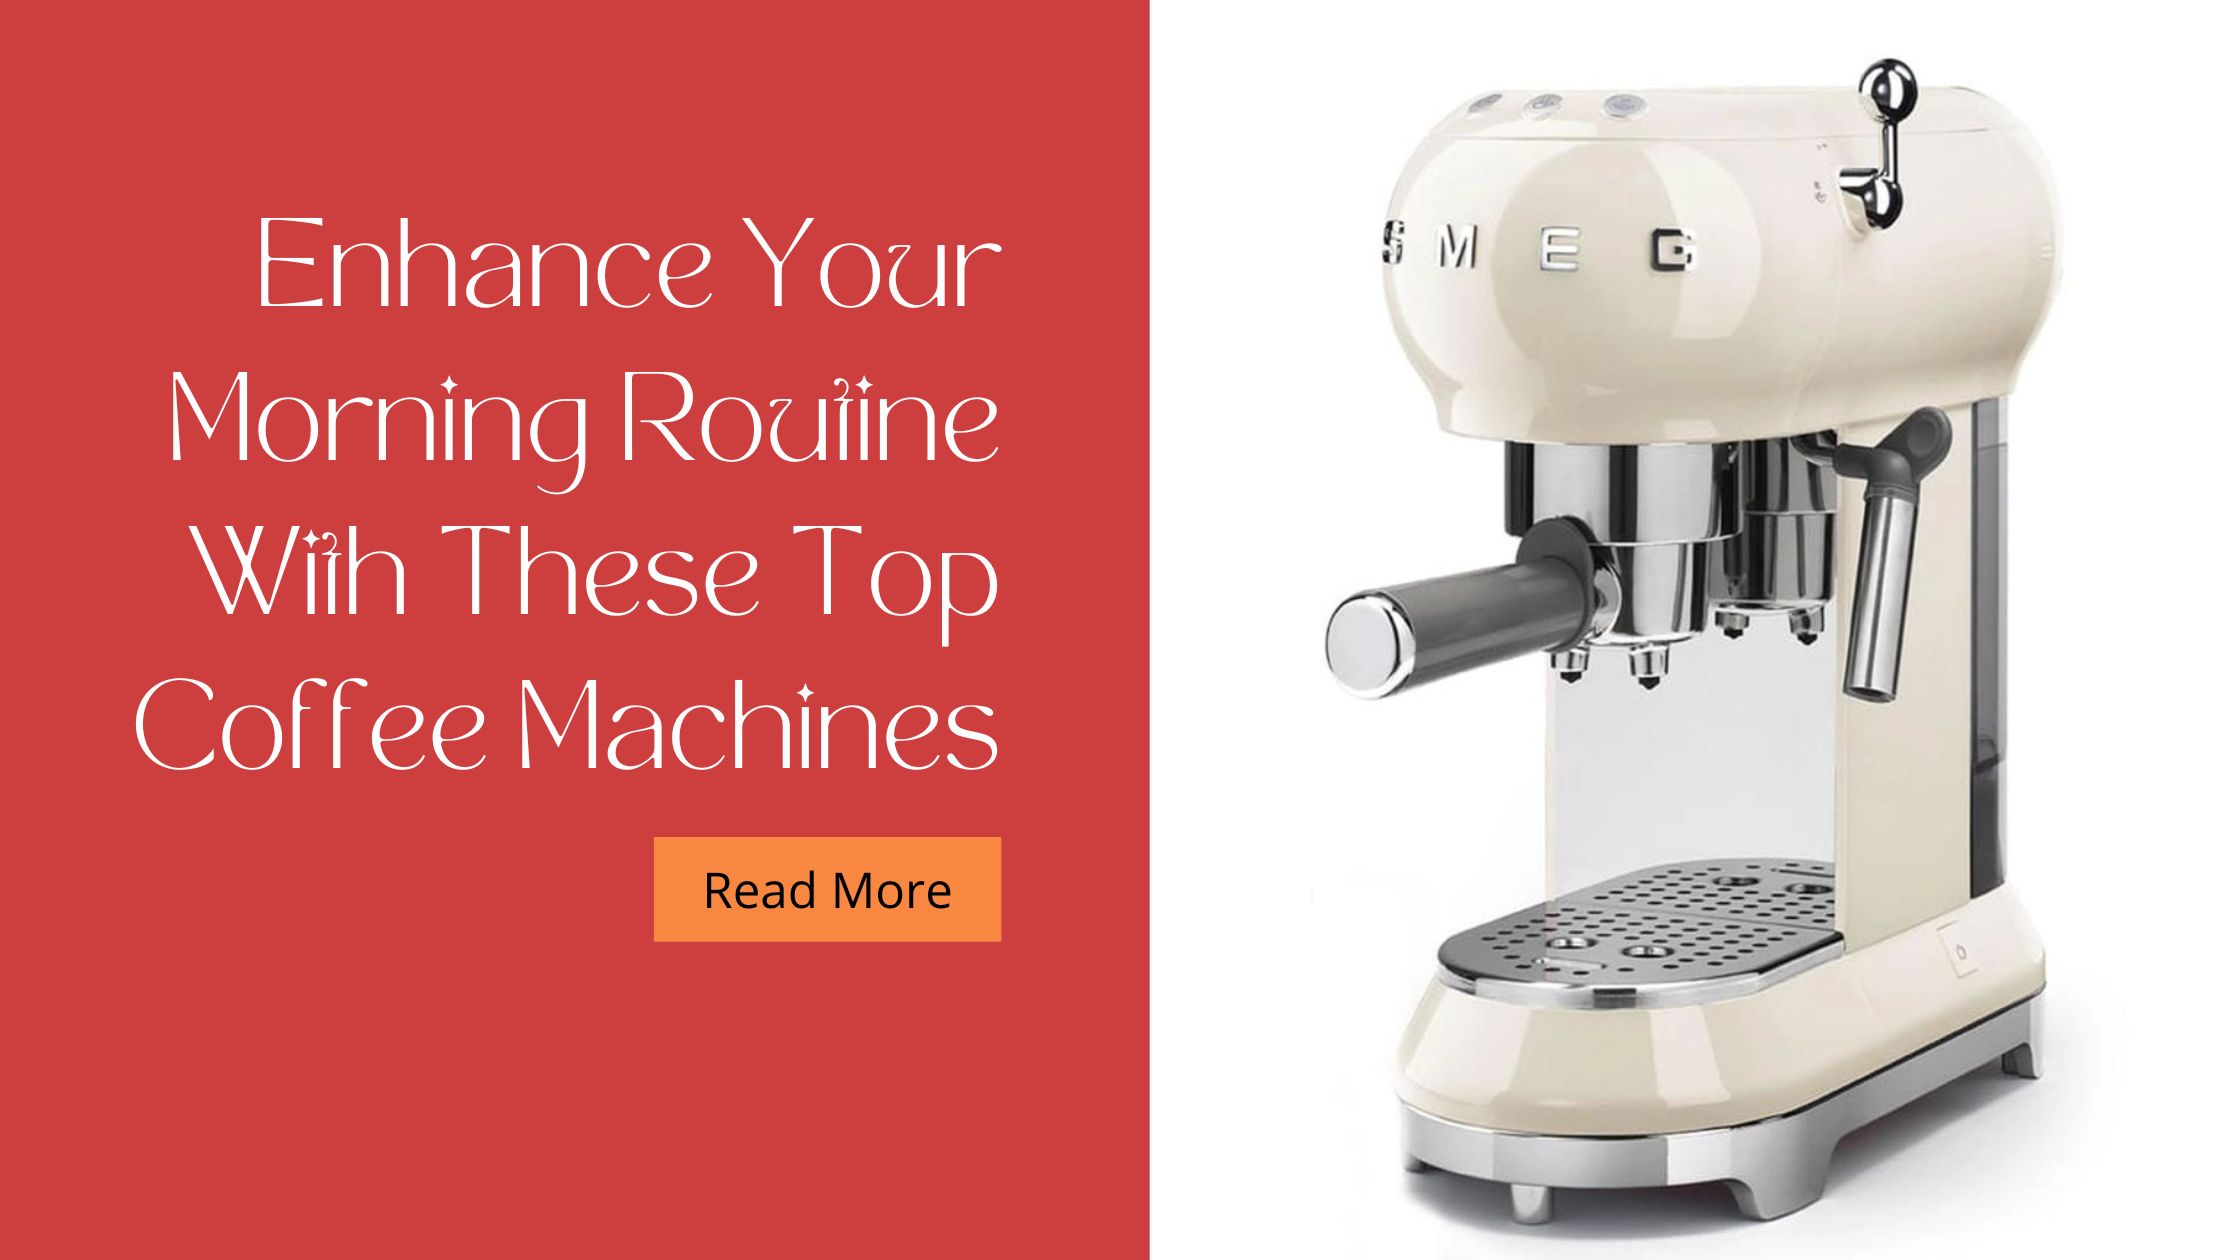 Enhance Your Morning Routine With These Top Coffee Machines